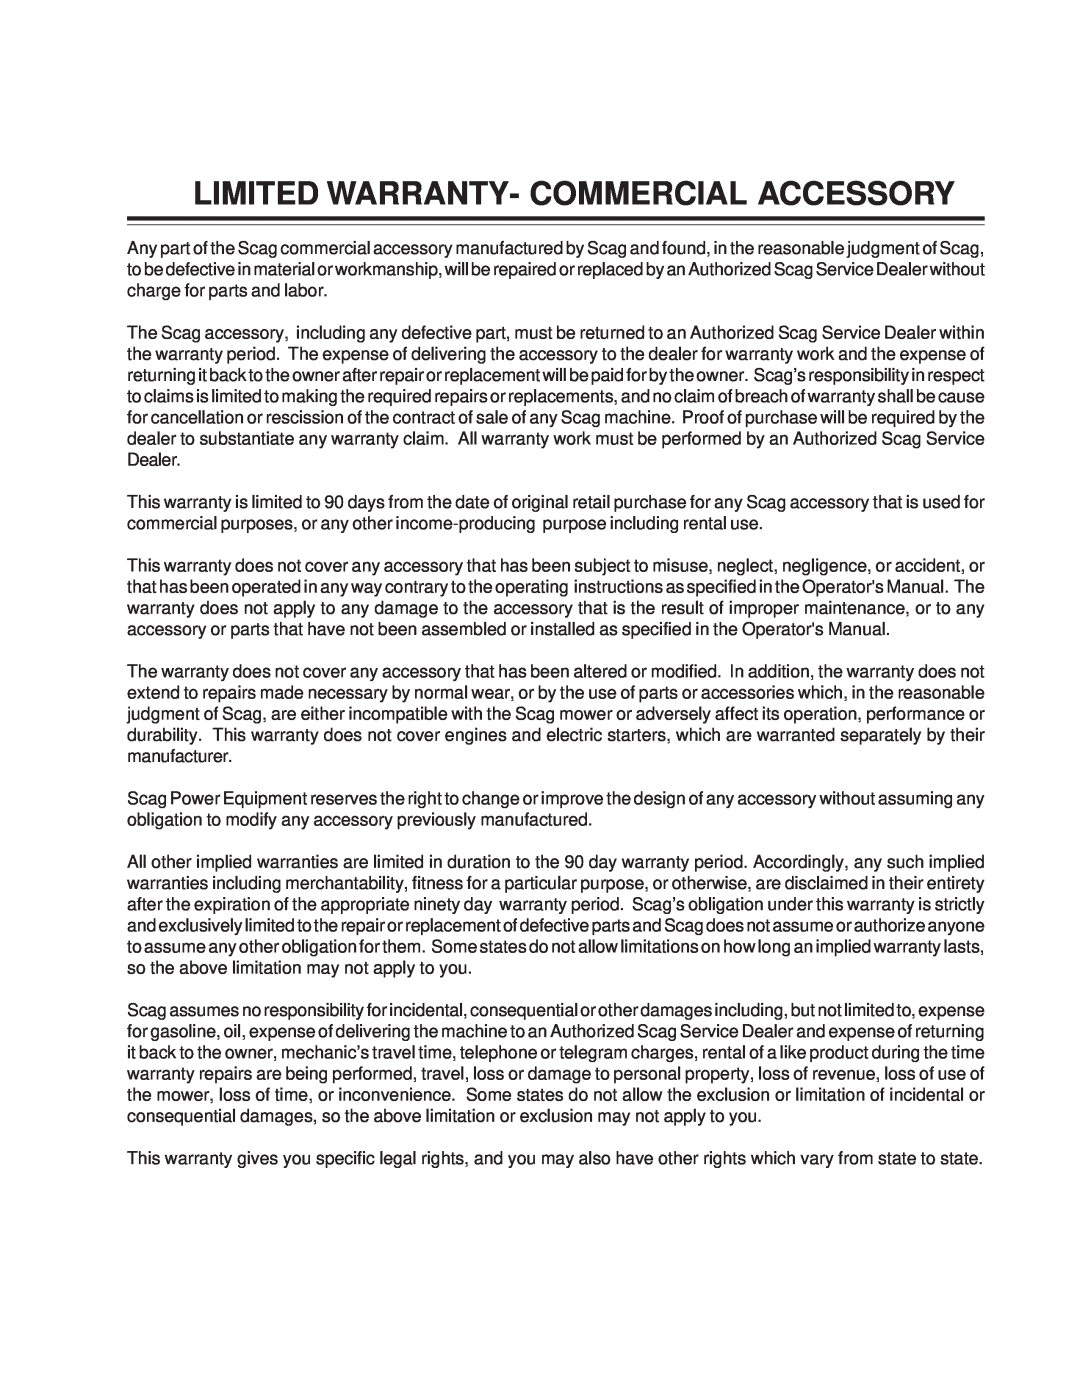 Scag Power Equipment GC-STT-CSV manual Limited Warranty- Commercial Accessory 